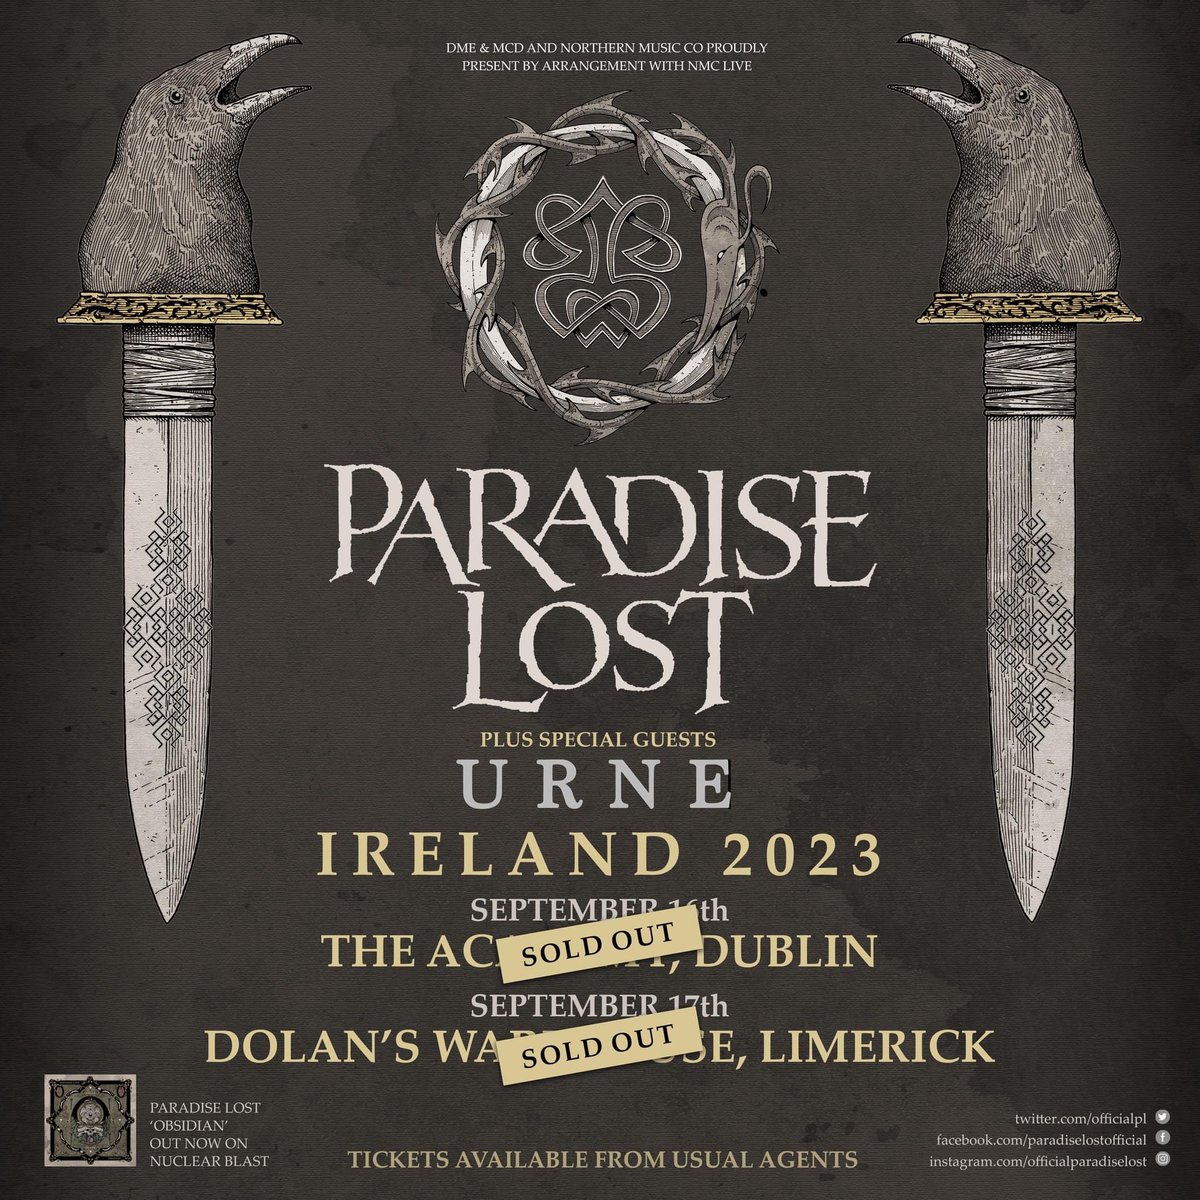 Back to Ireland this weekend! Supporting the legends in Paradise Lost.